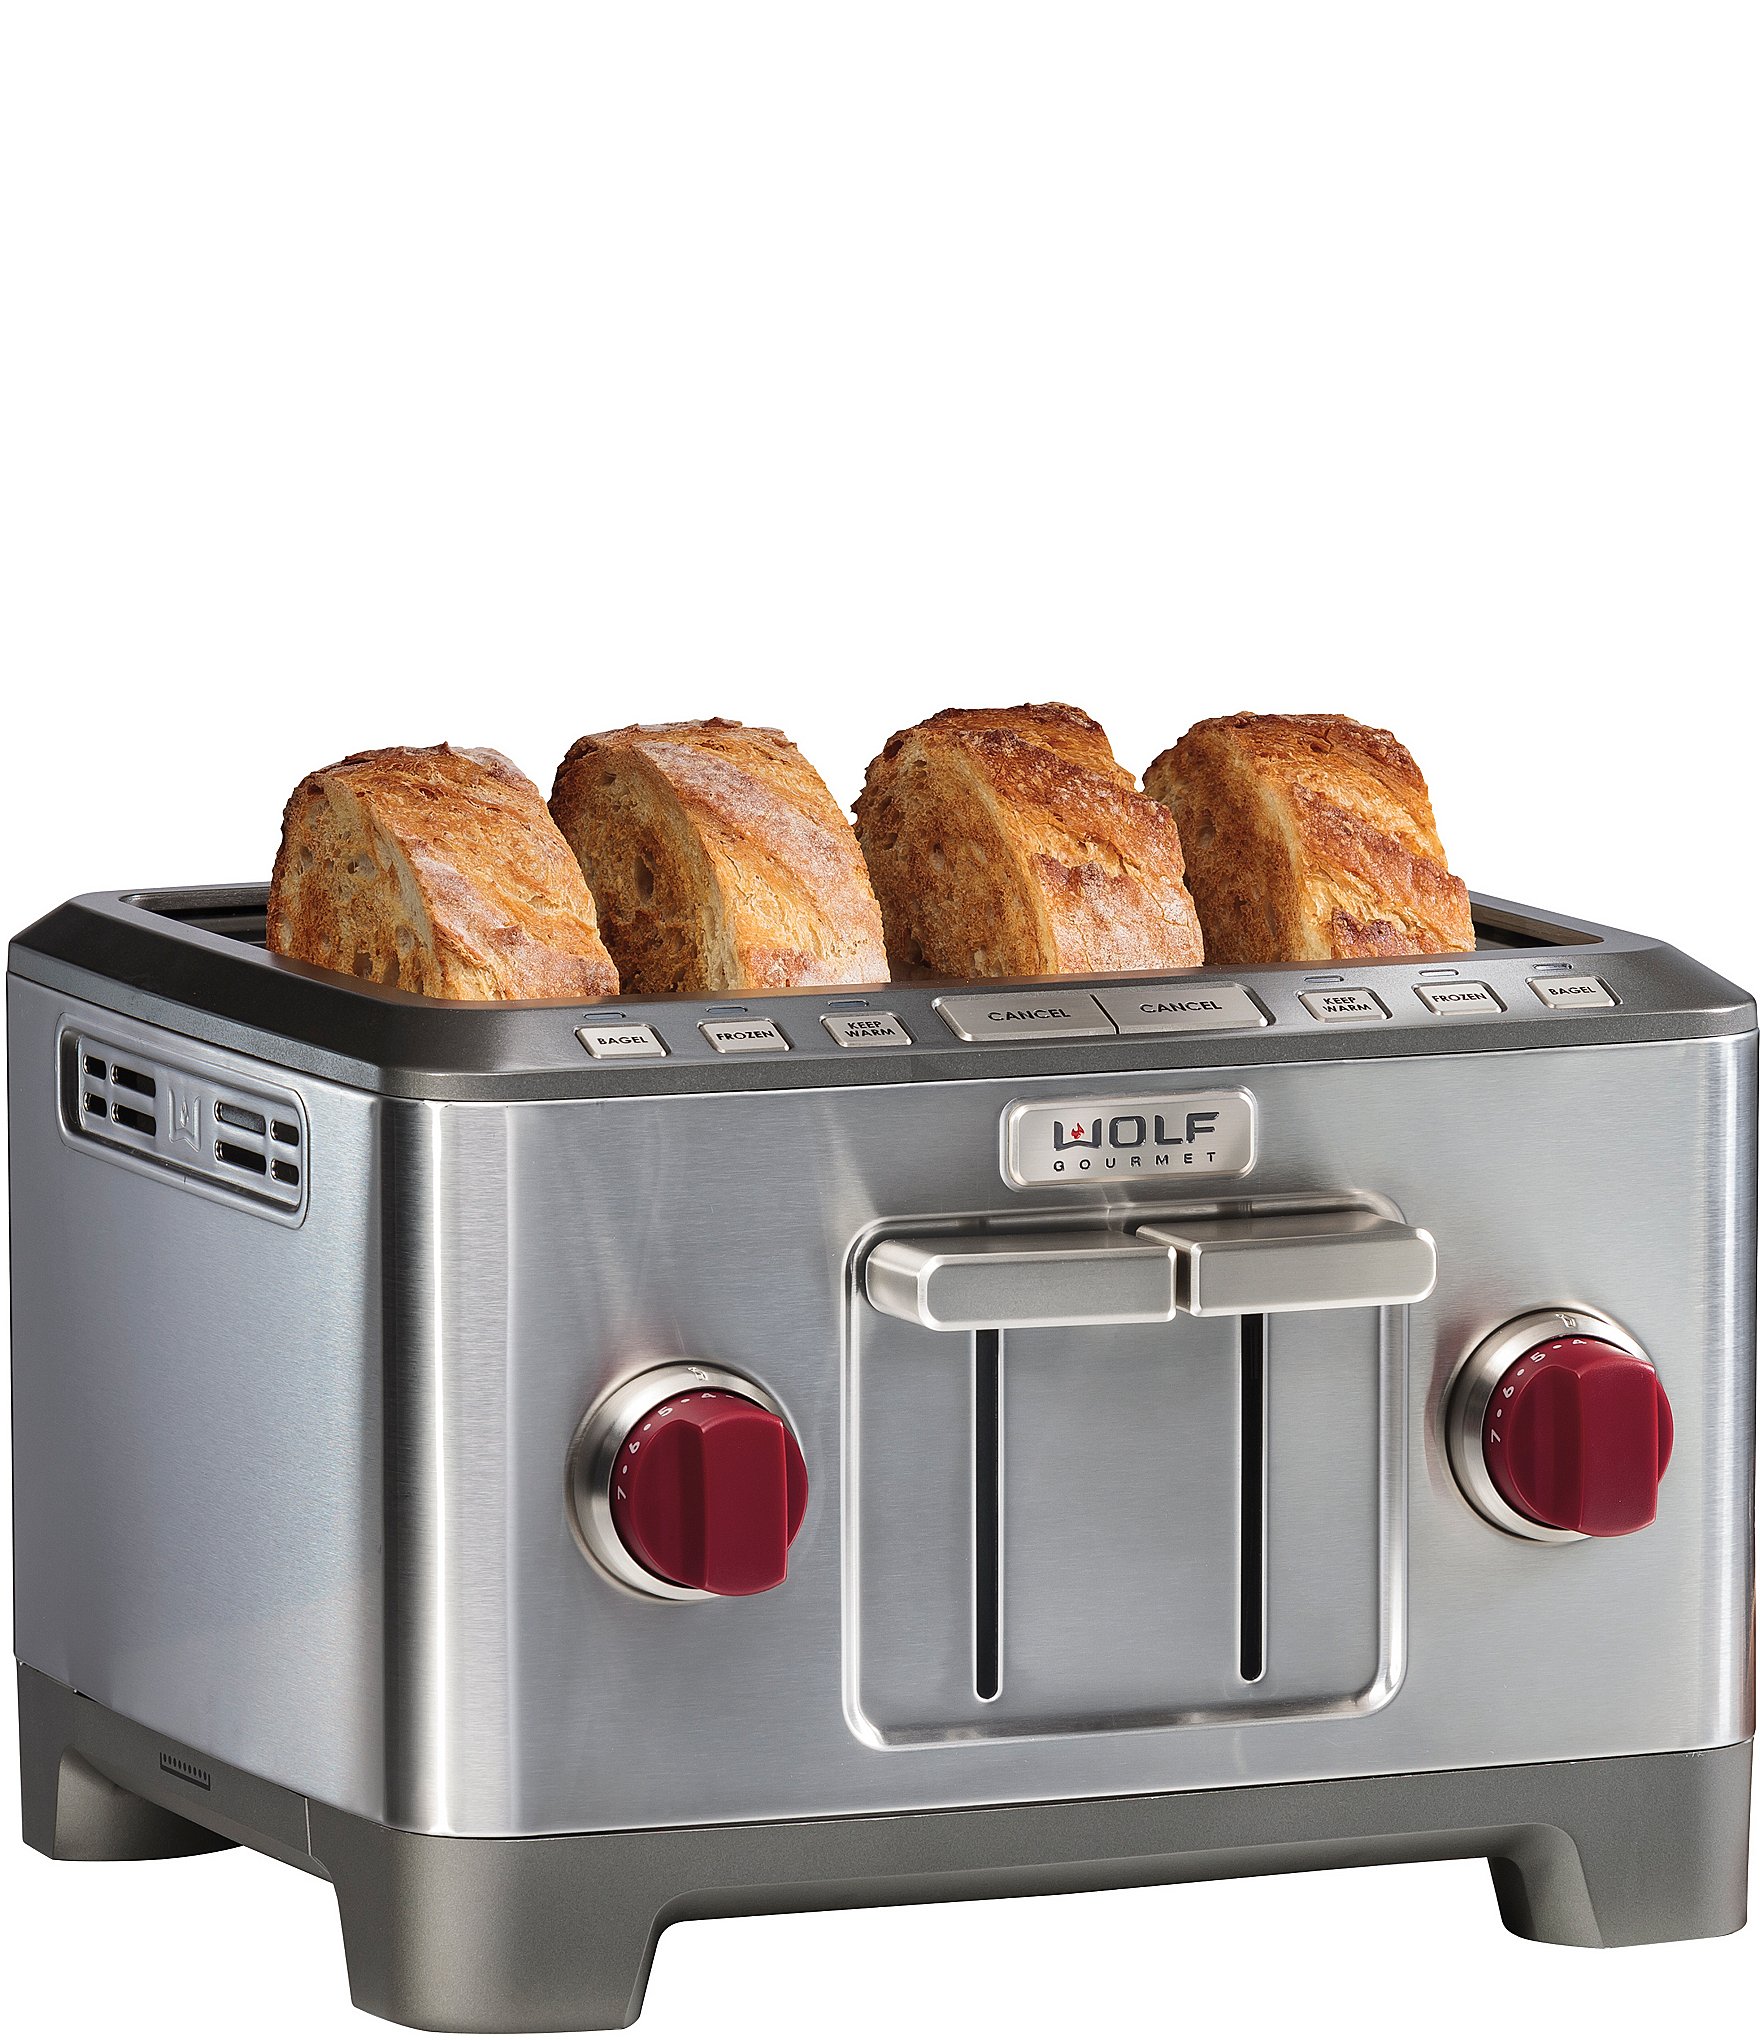 https://dimg.dillards.com/is/image/DillardsZoom/zoom/wolf-gourmet-4-slice-toaster-with-red-knobs/05786011_zi_stainless_steel.jpg